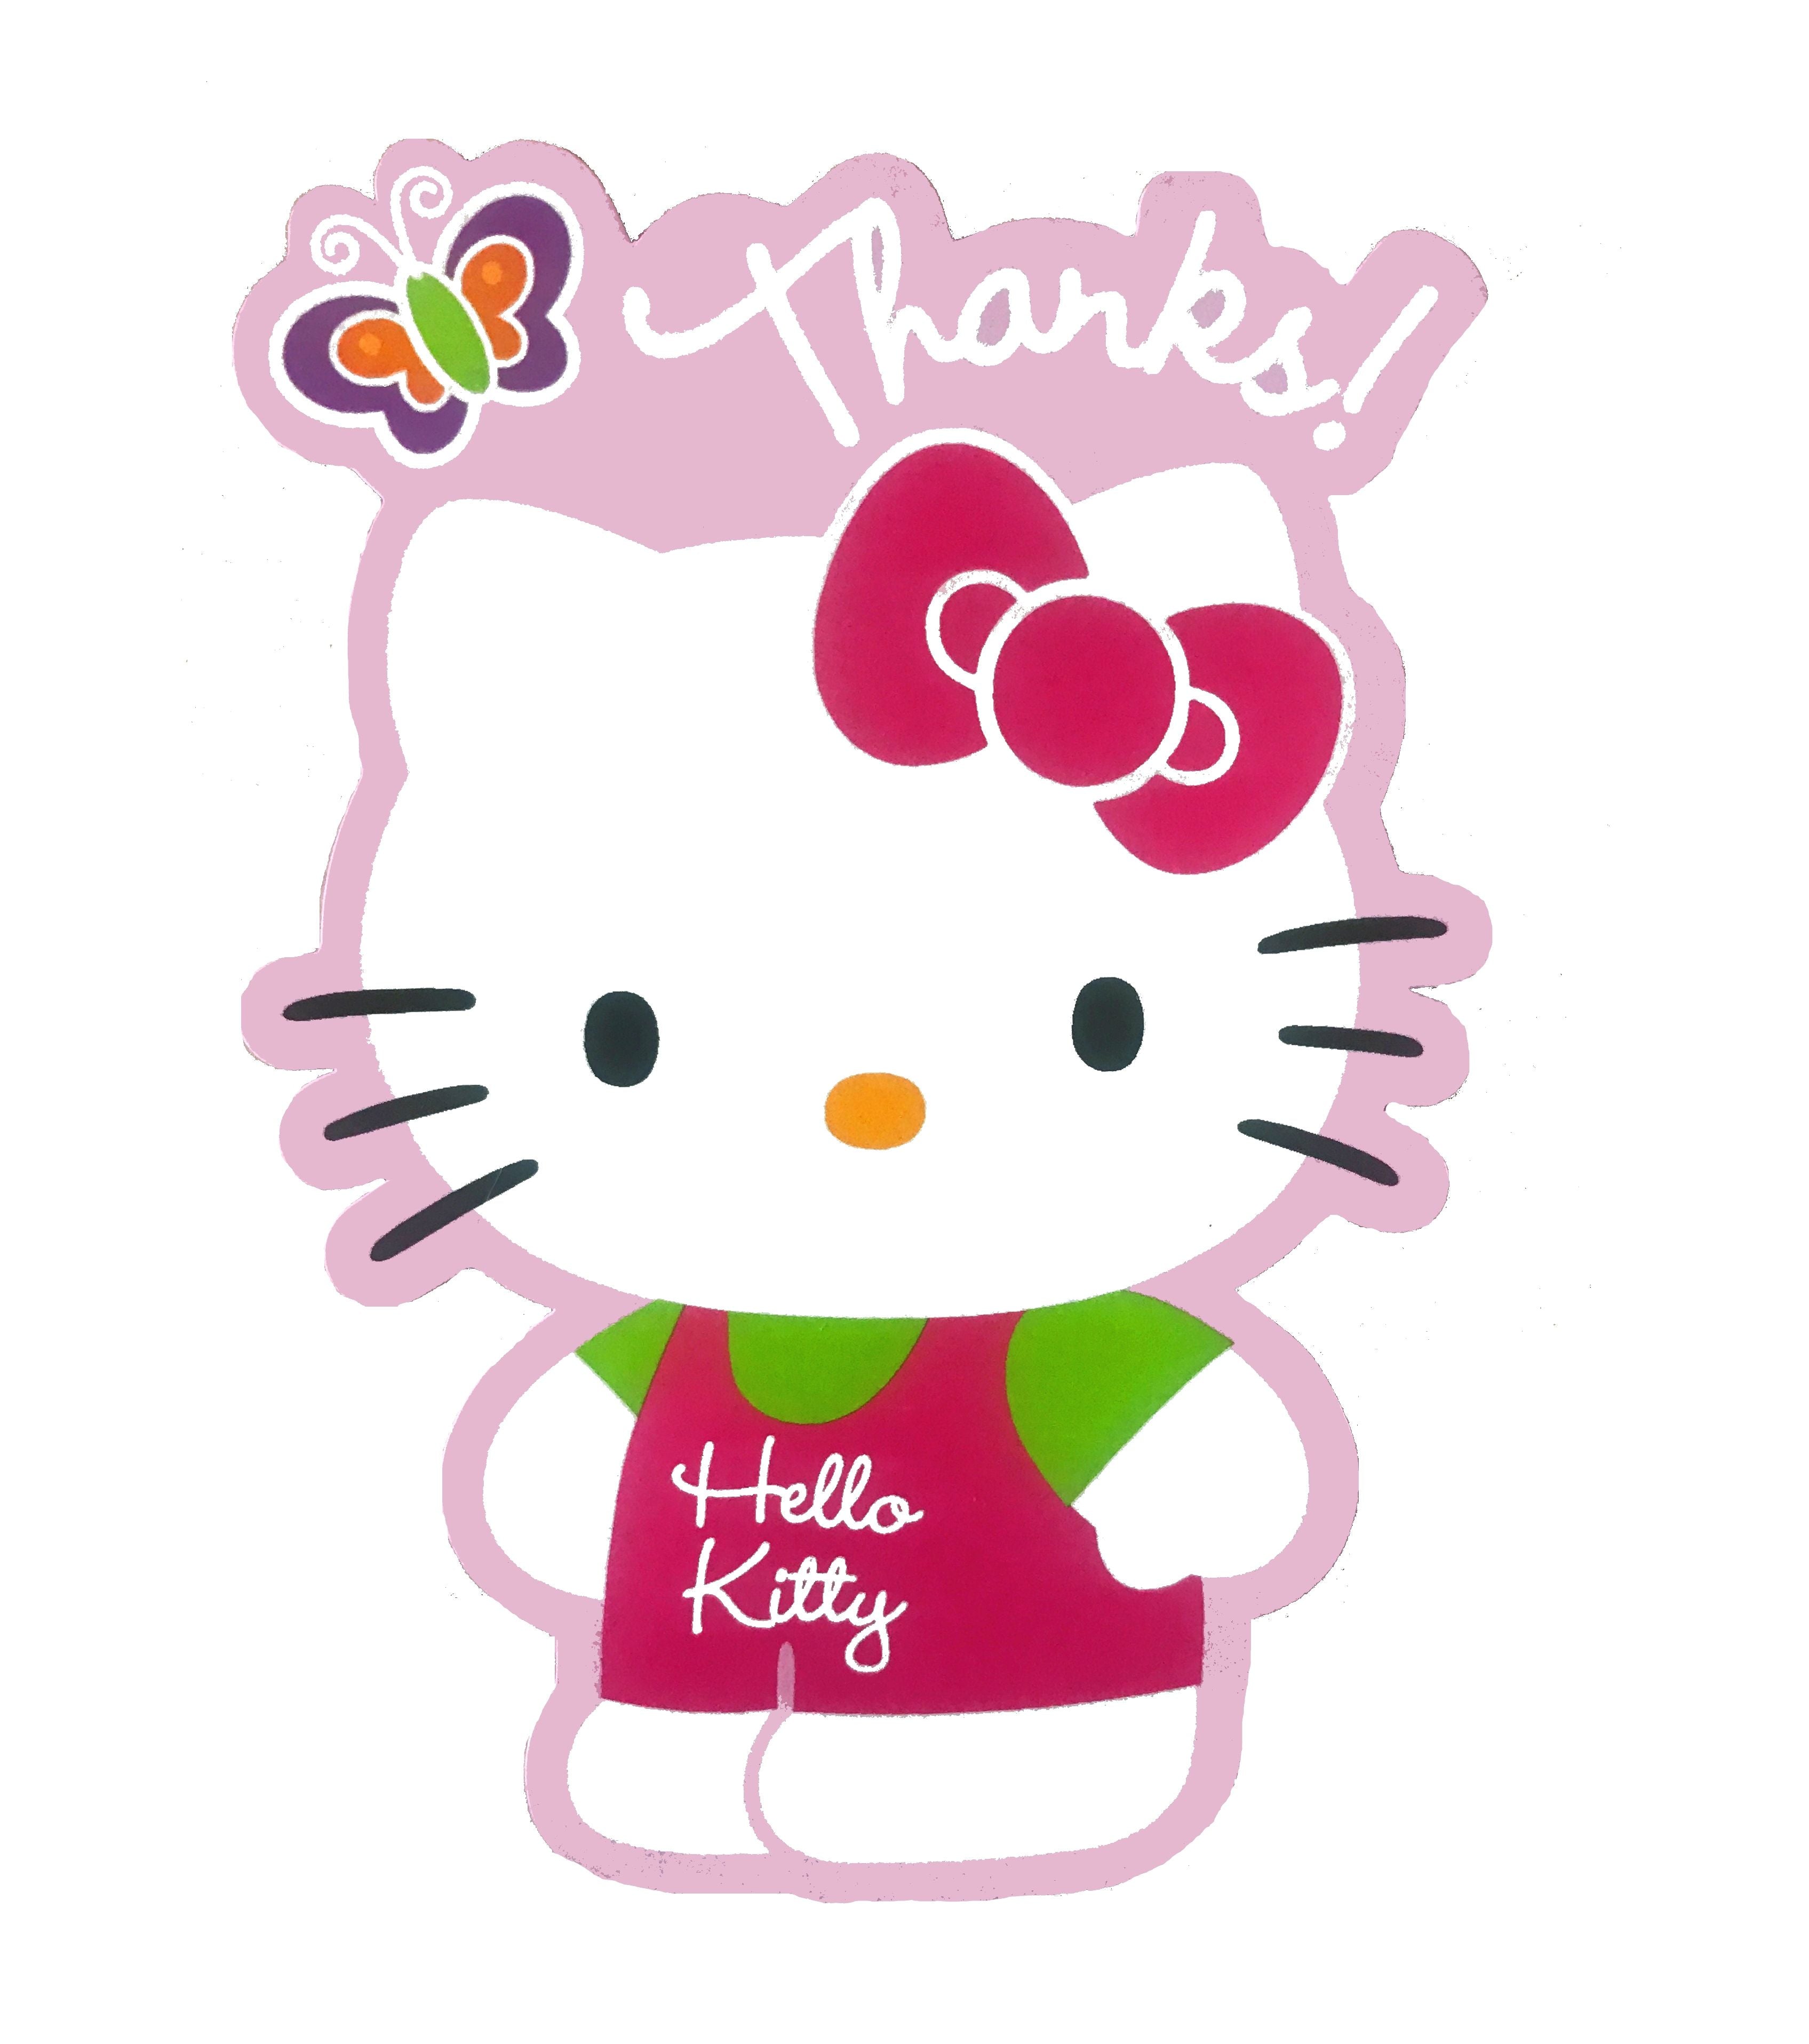 Thank you @zojirushiamerica for my Limited Edition Hello Kitty